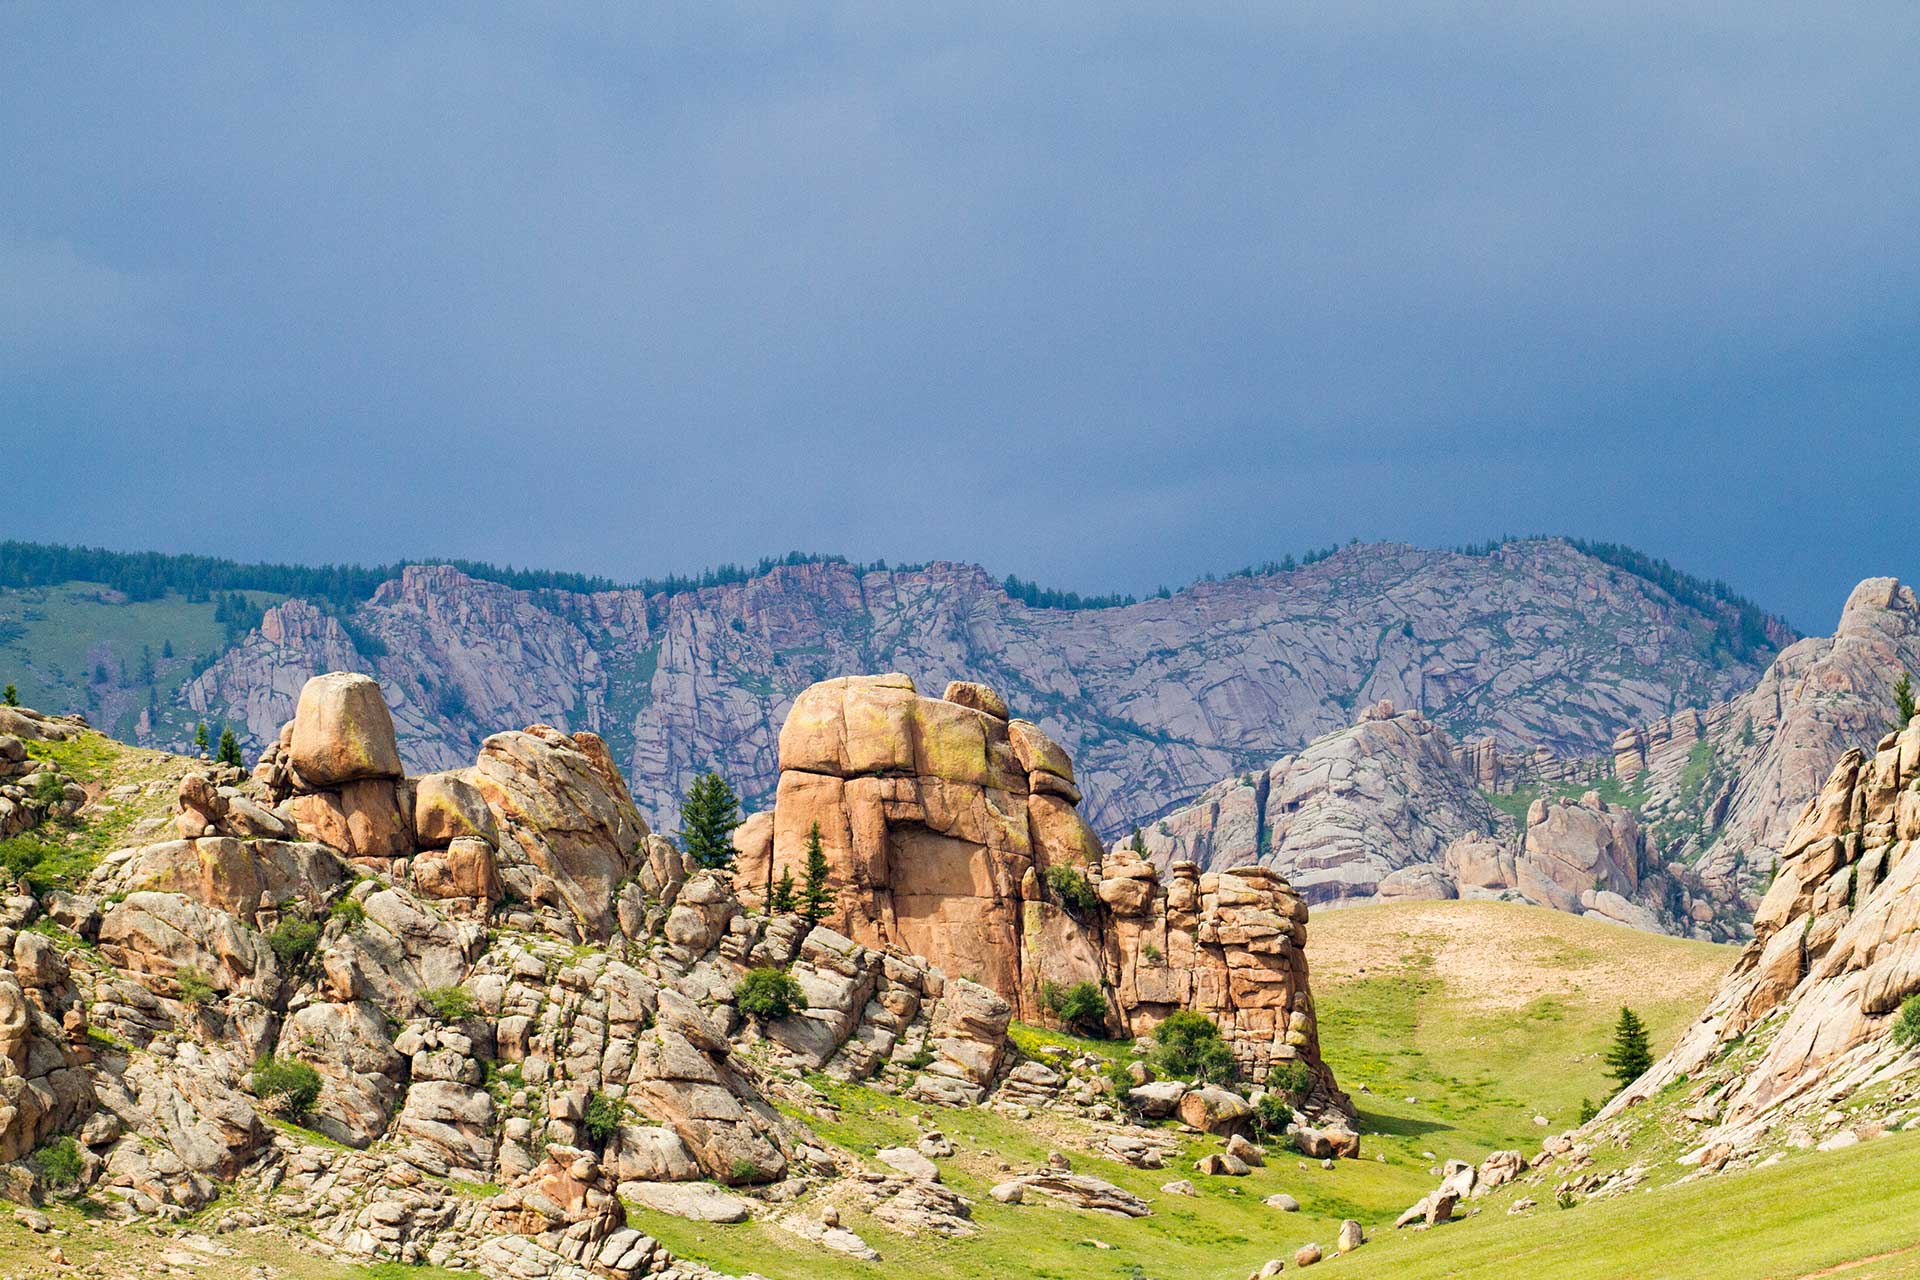 Granite rock formations of the Khentii Mountains, Mongolia